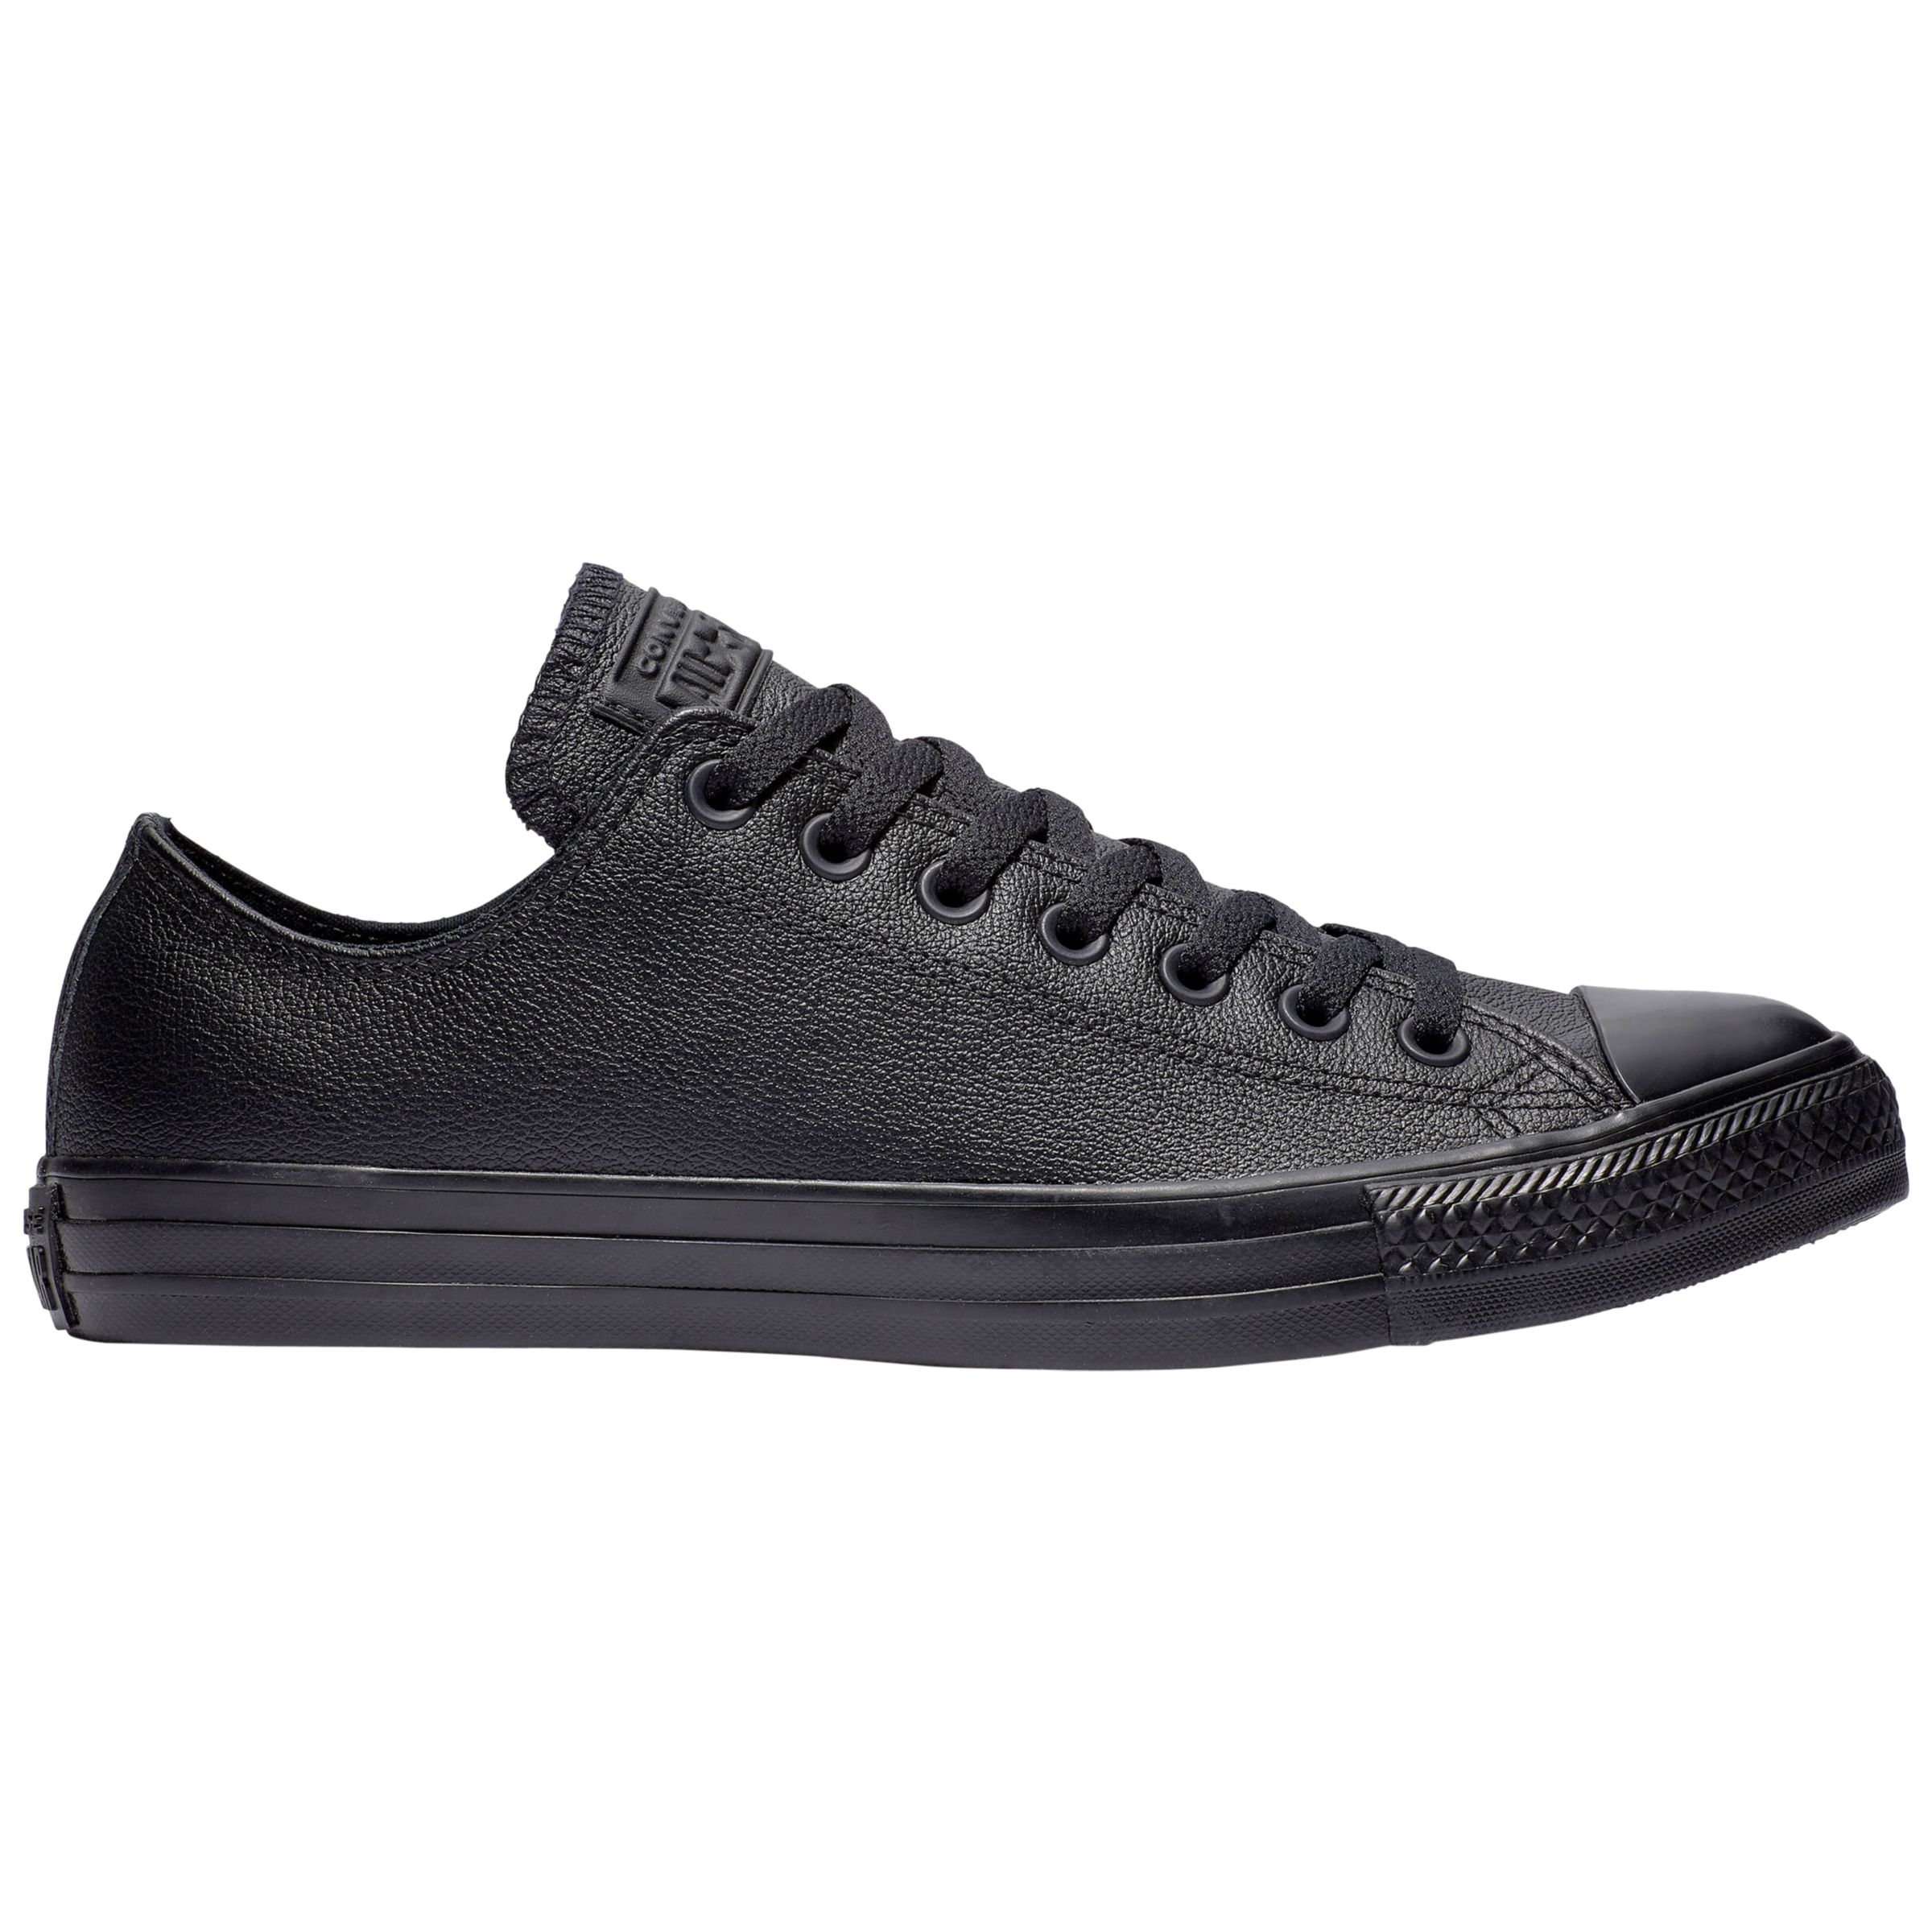 Converse All Star Leather Trainers, Black at John Lewis & Partners